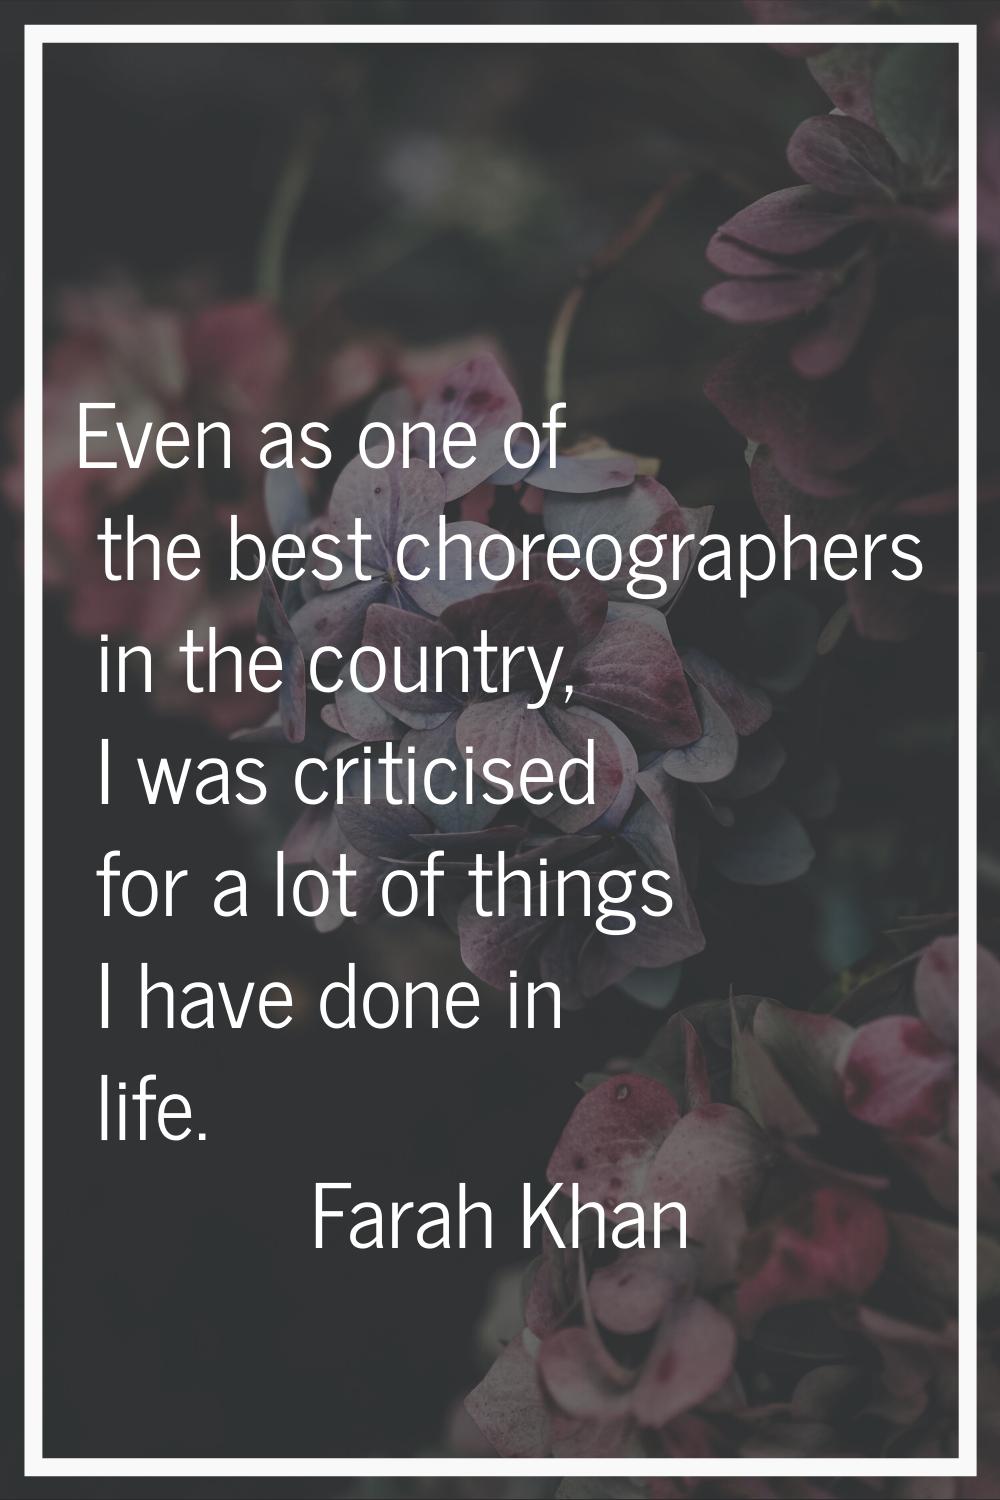 Even as one of the best choreographers in the country, I was criticised for a lot of things I have 